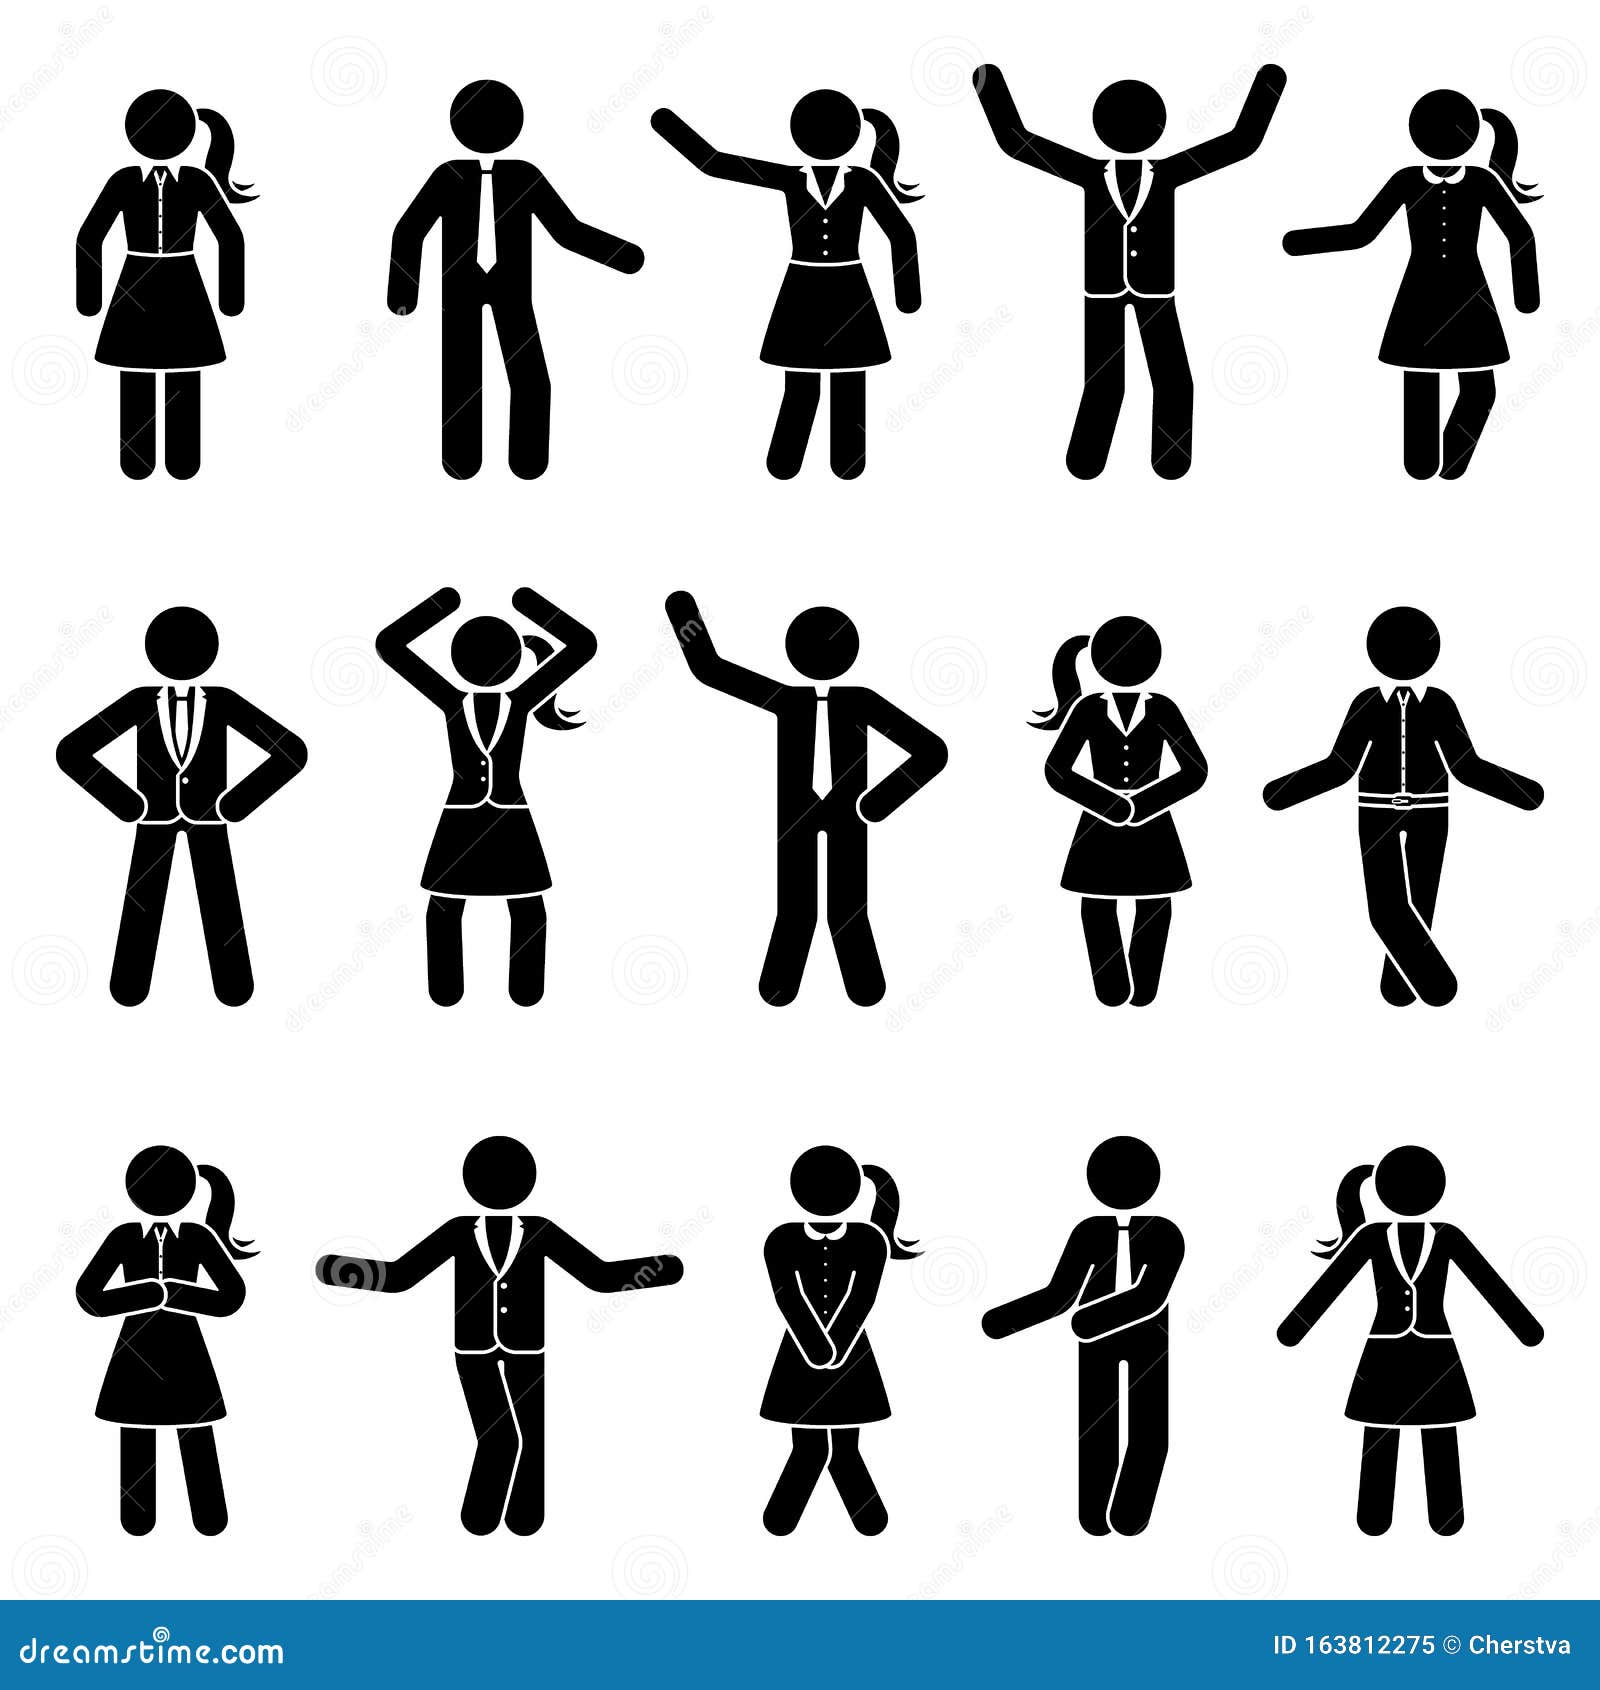 stick figure business male and female standing front view different poses  icon pictogram set. office men and women people